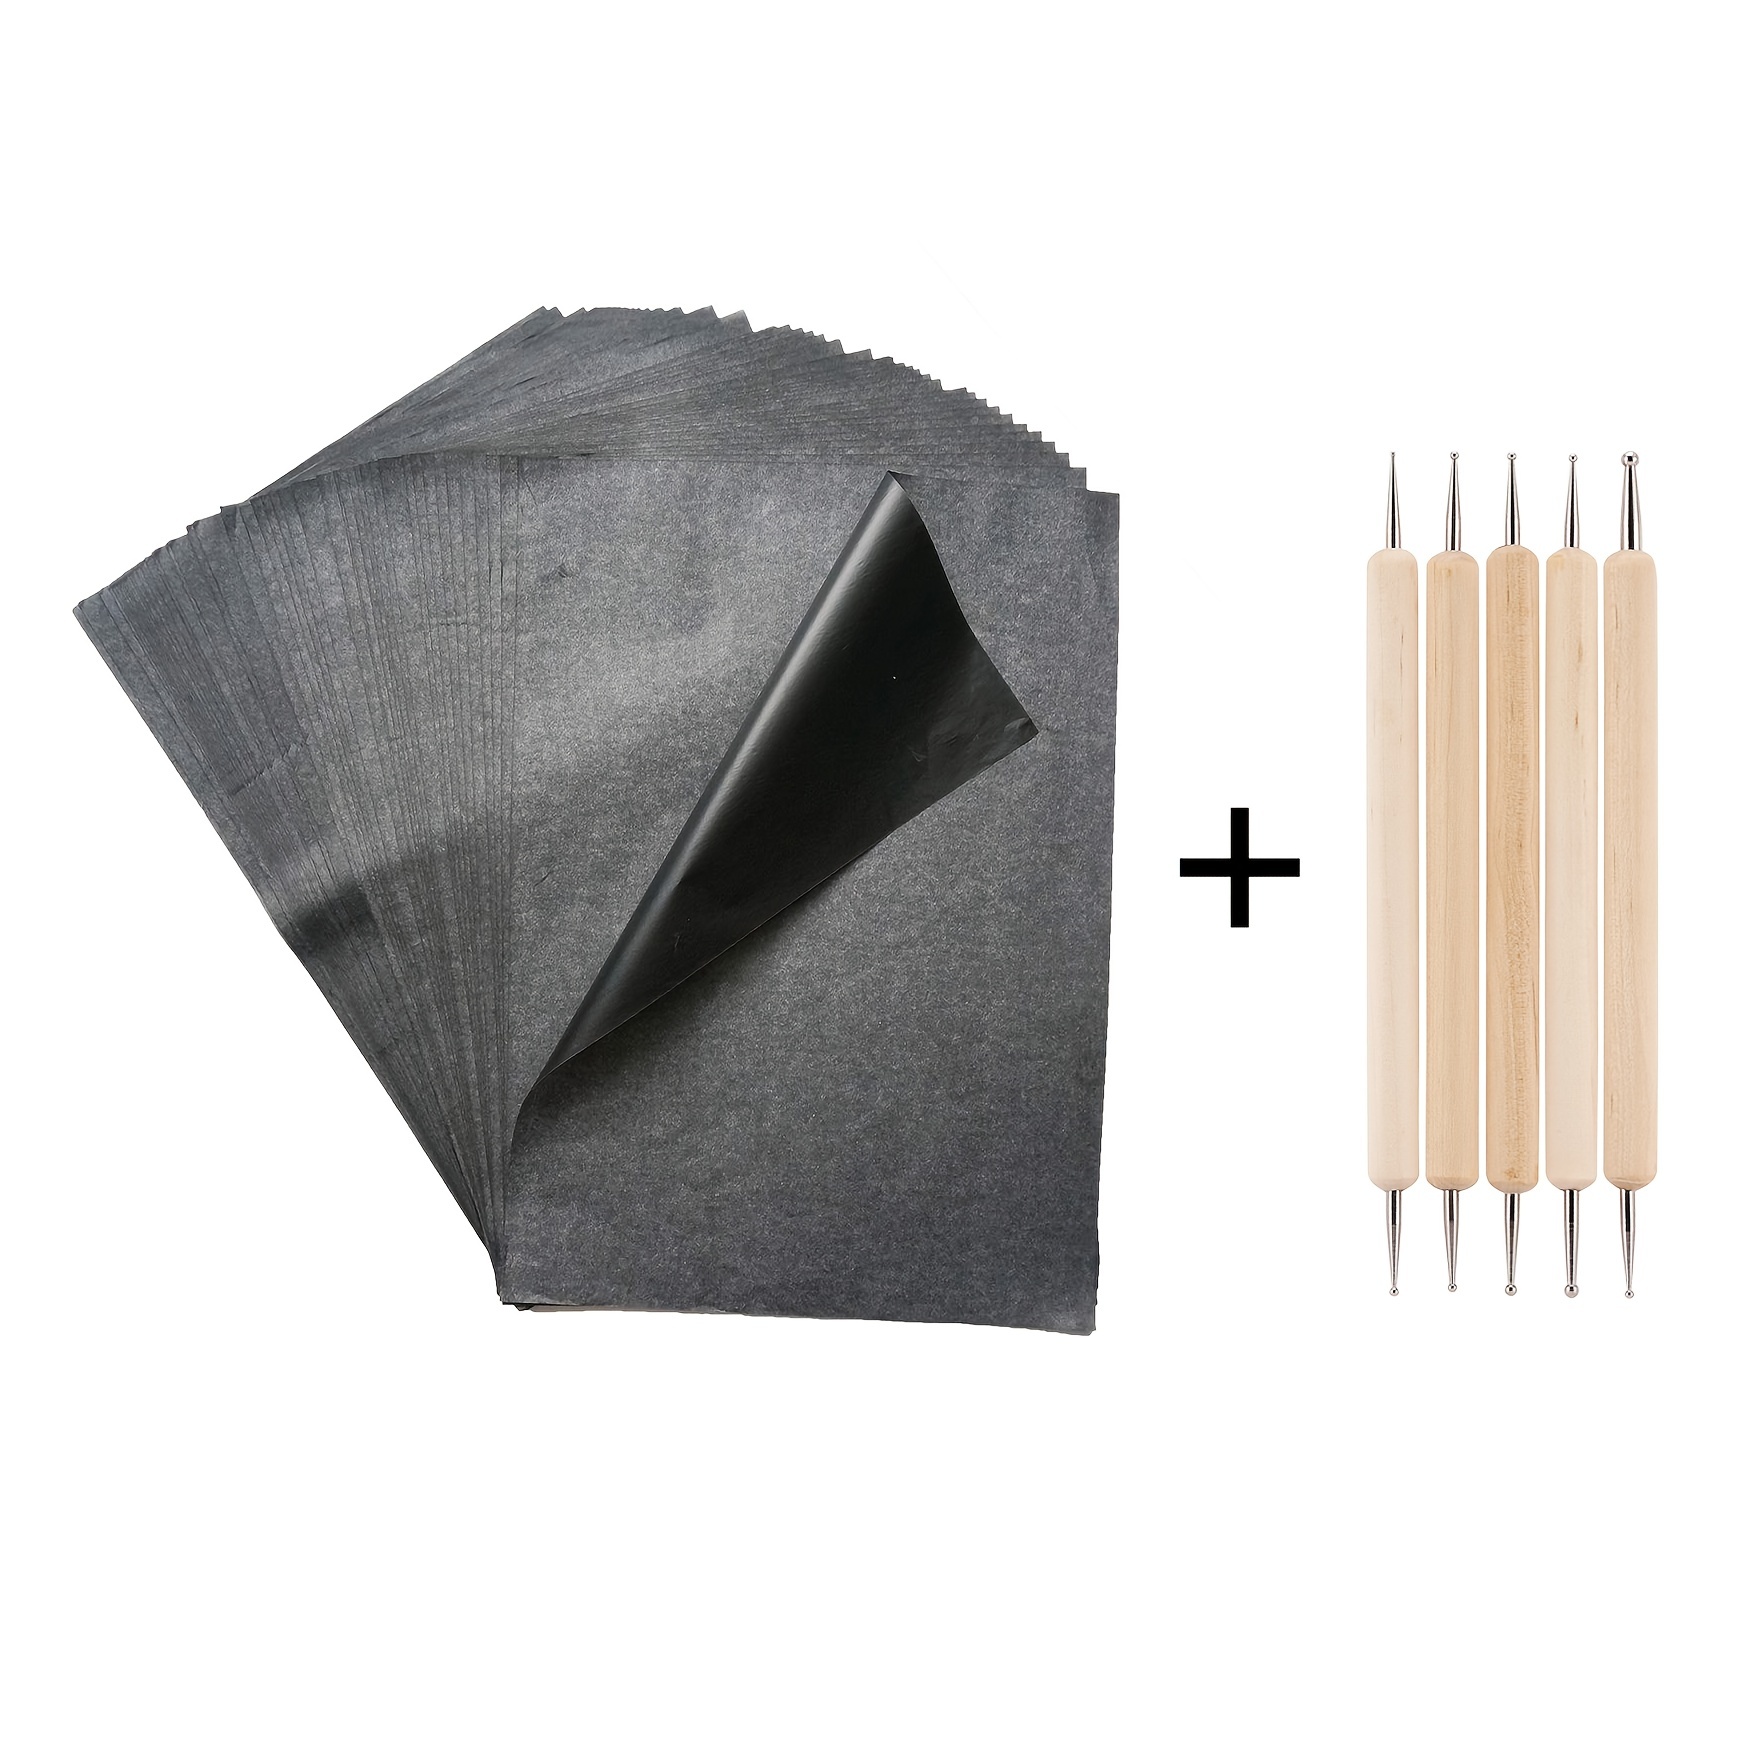  105 Pcs Carbon Transfer Paper 11.7 x 8.3 Inch Tracing Paper  Carbon Graphite Copy Paper with Embossing Stylus Tracing Stylus Dotting  Tools for Cloth Paper Wood (Black, White)